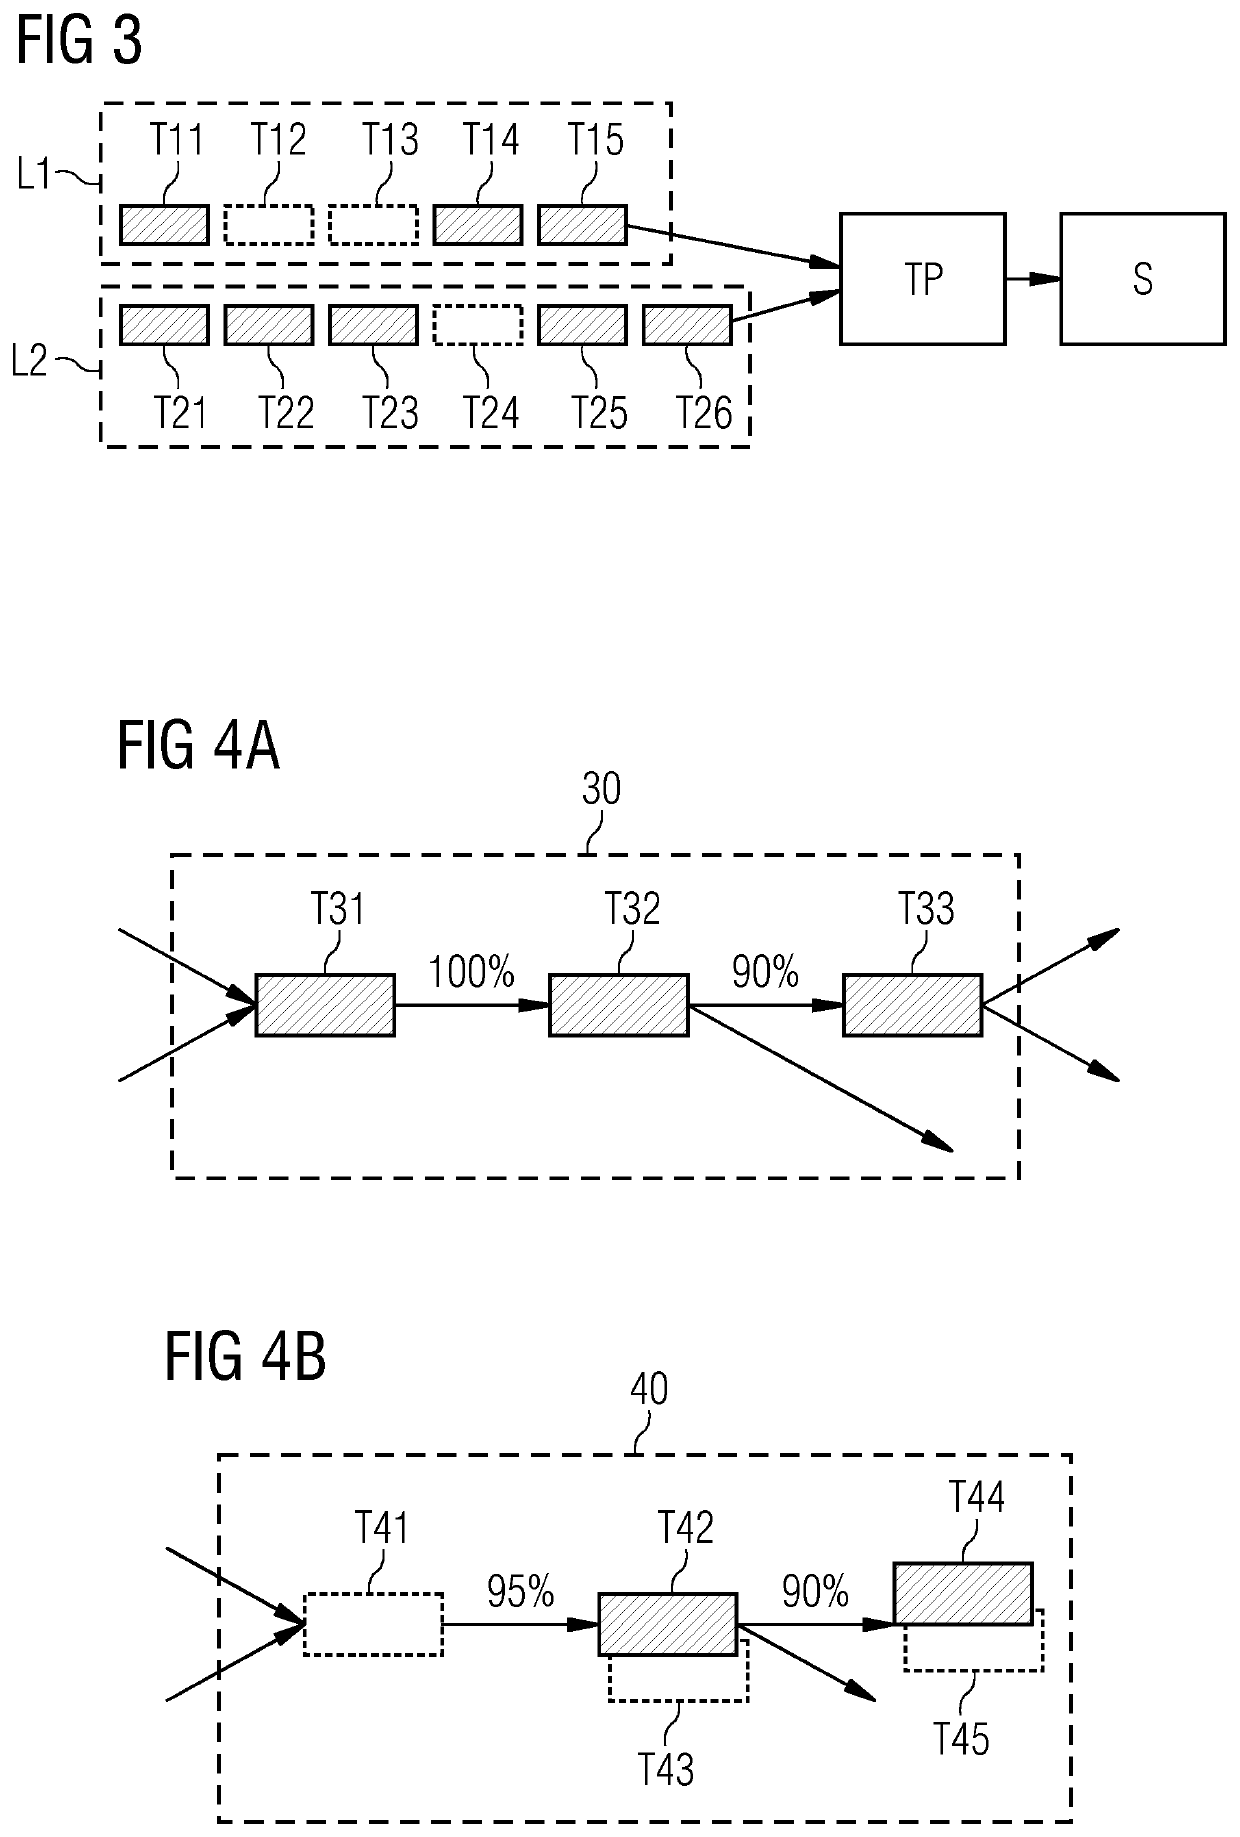 Method for automatically generating a behavior tree program for controlling a machine